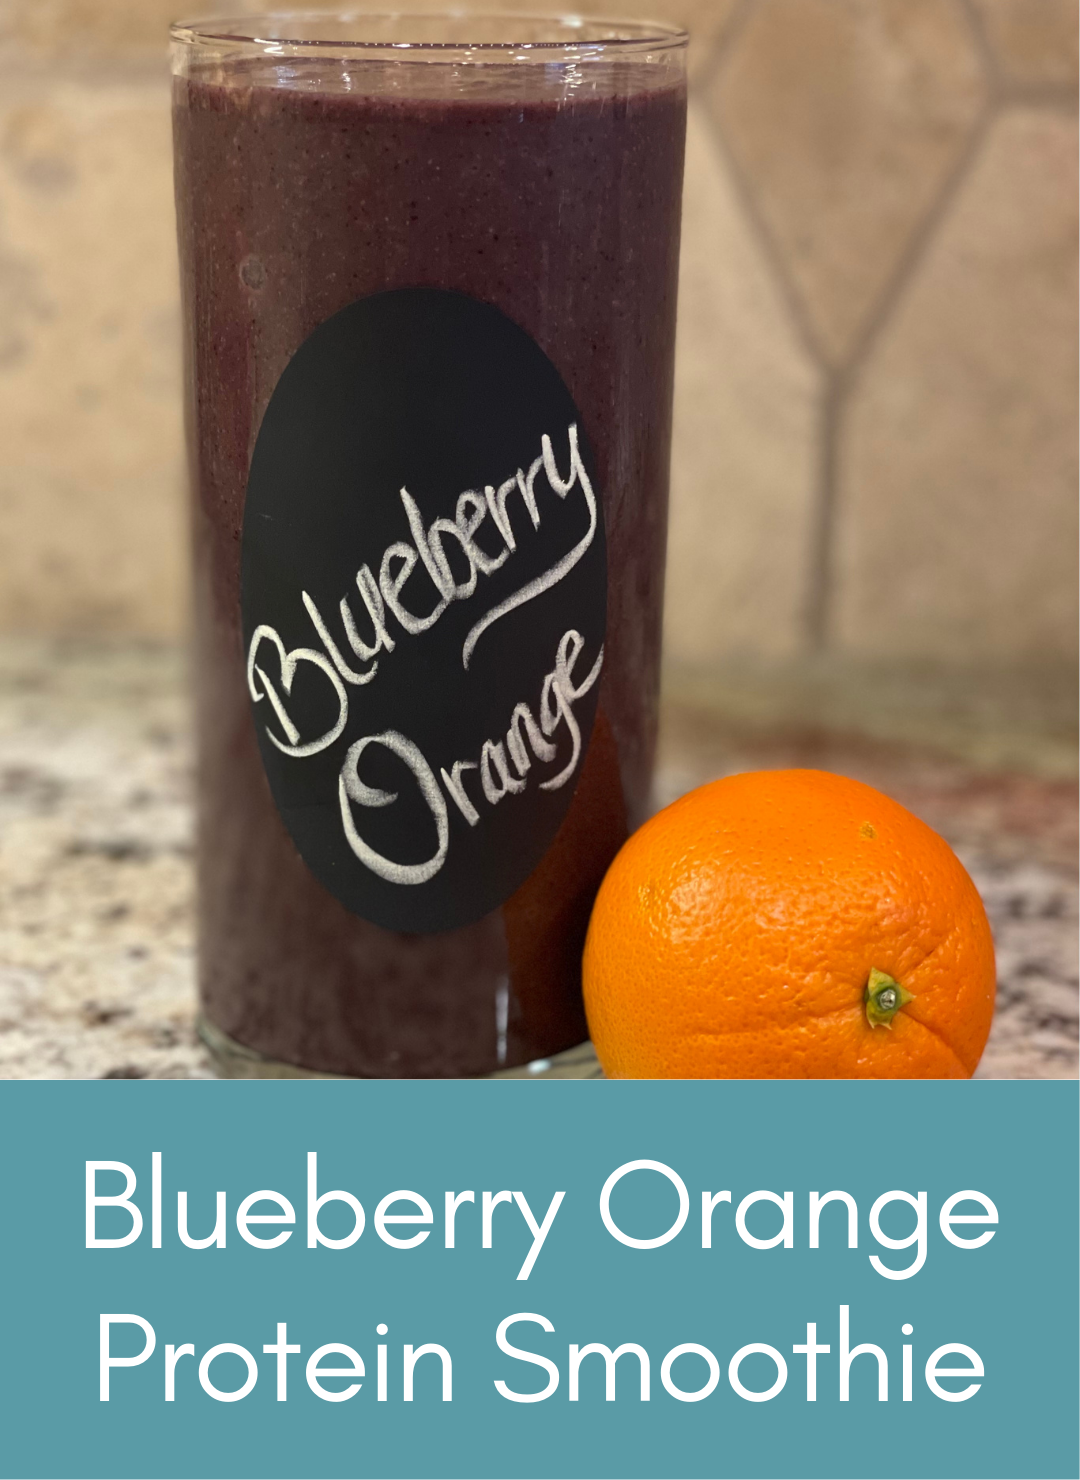 Blueberry orange protein power smoothie Picture with link to recipe